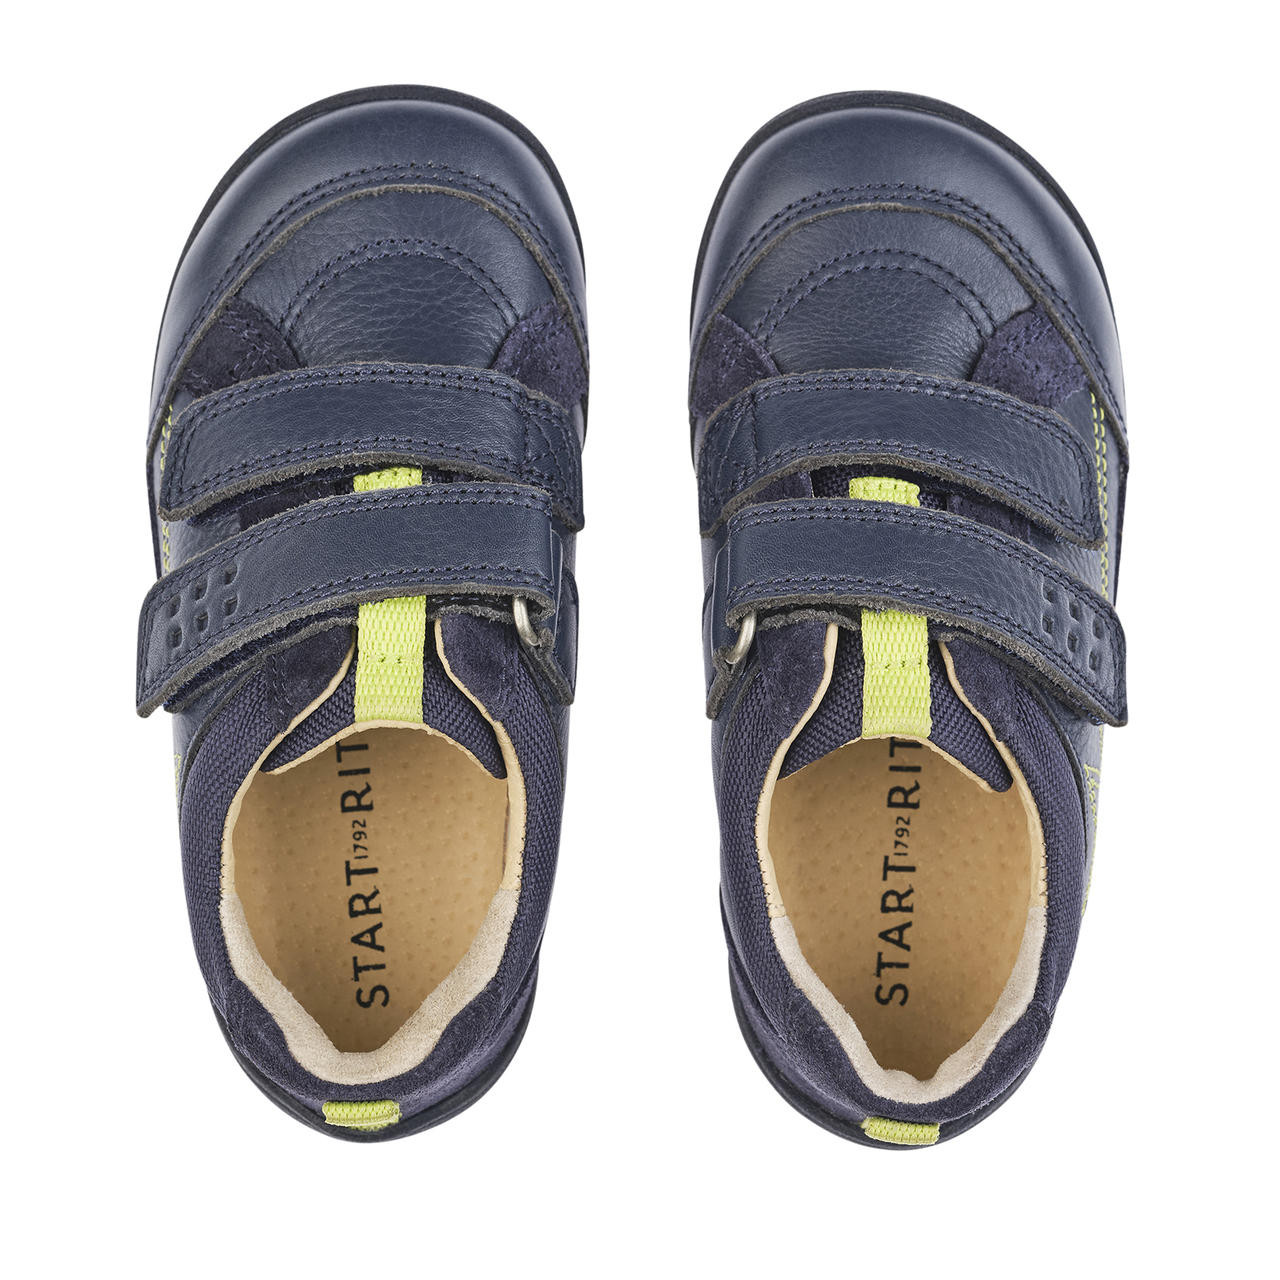 Zigzag, Navy blue leather boys rip-tape first walking shoes